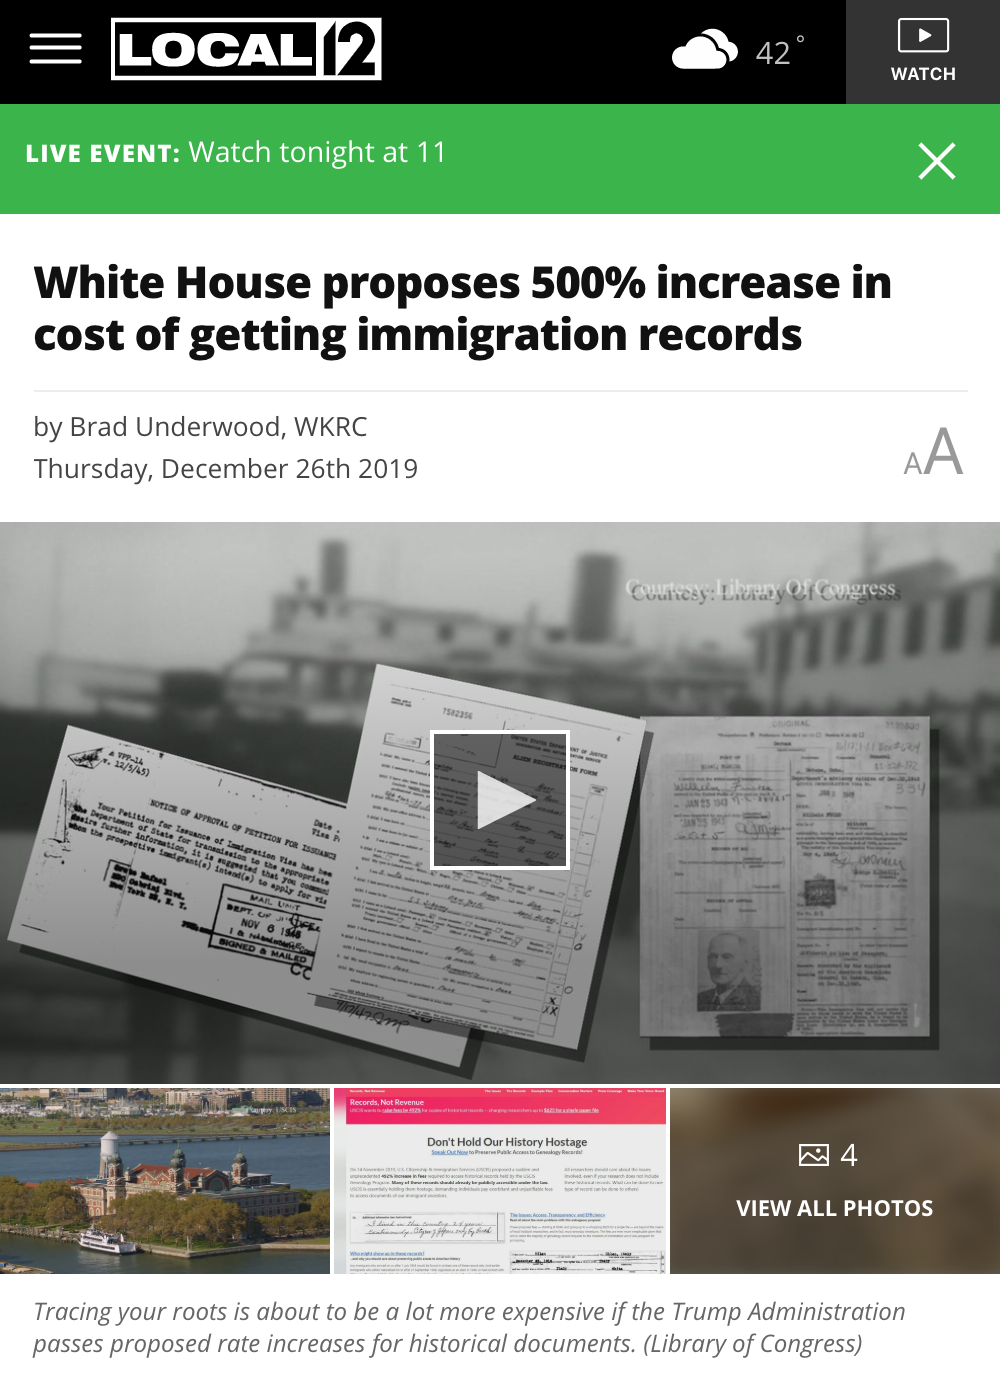 White House proposes 500% increase in cost of getting immigration records